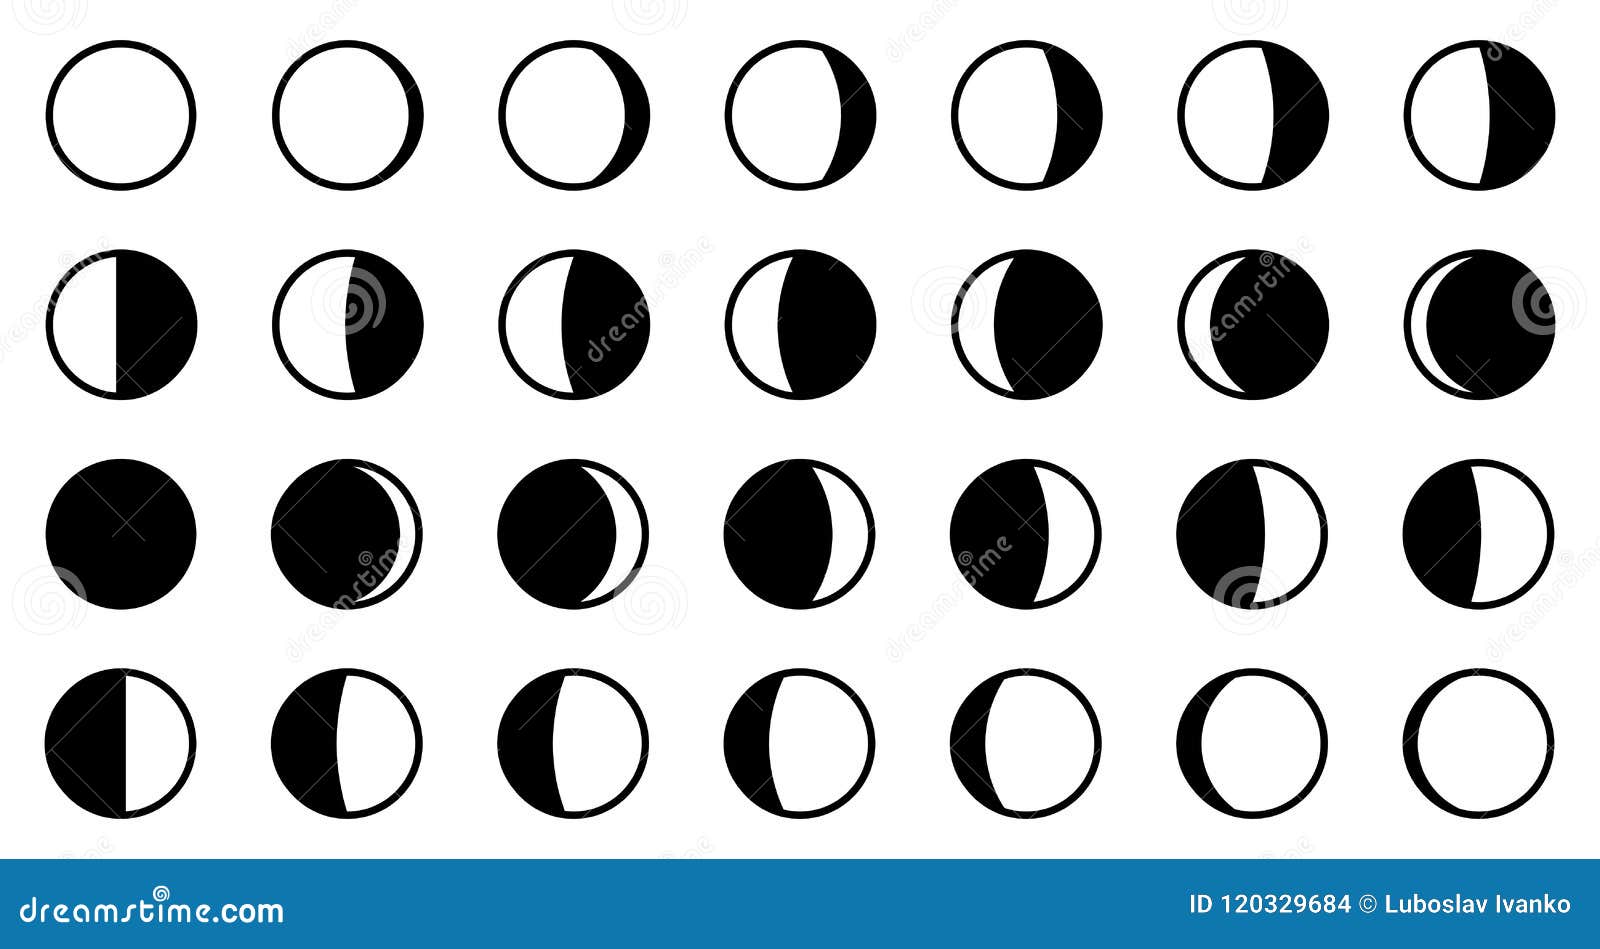 Lunar / Moon Phases Cycle. All 28 Shapes for Each Day - New, Ful